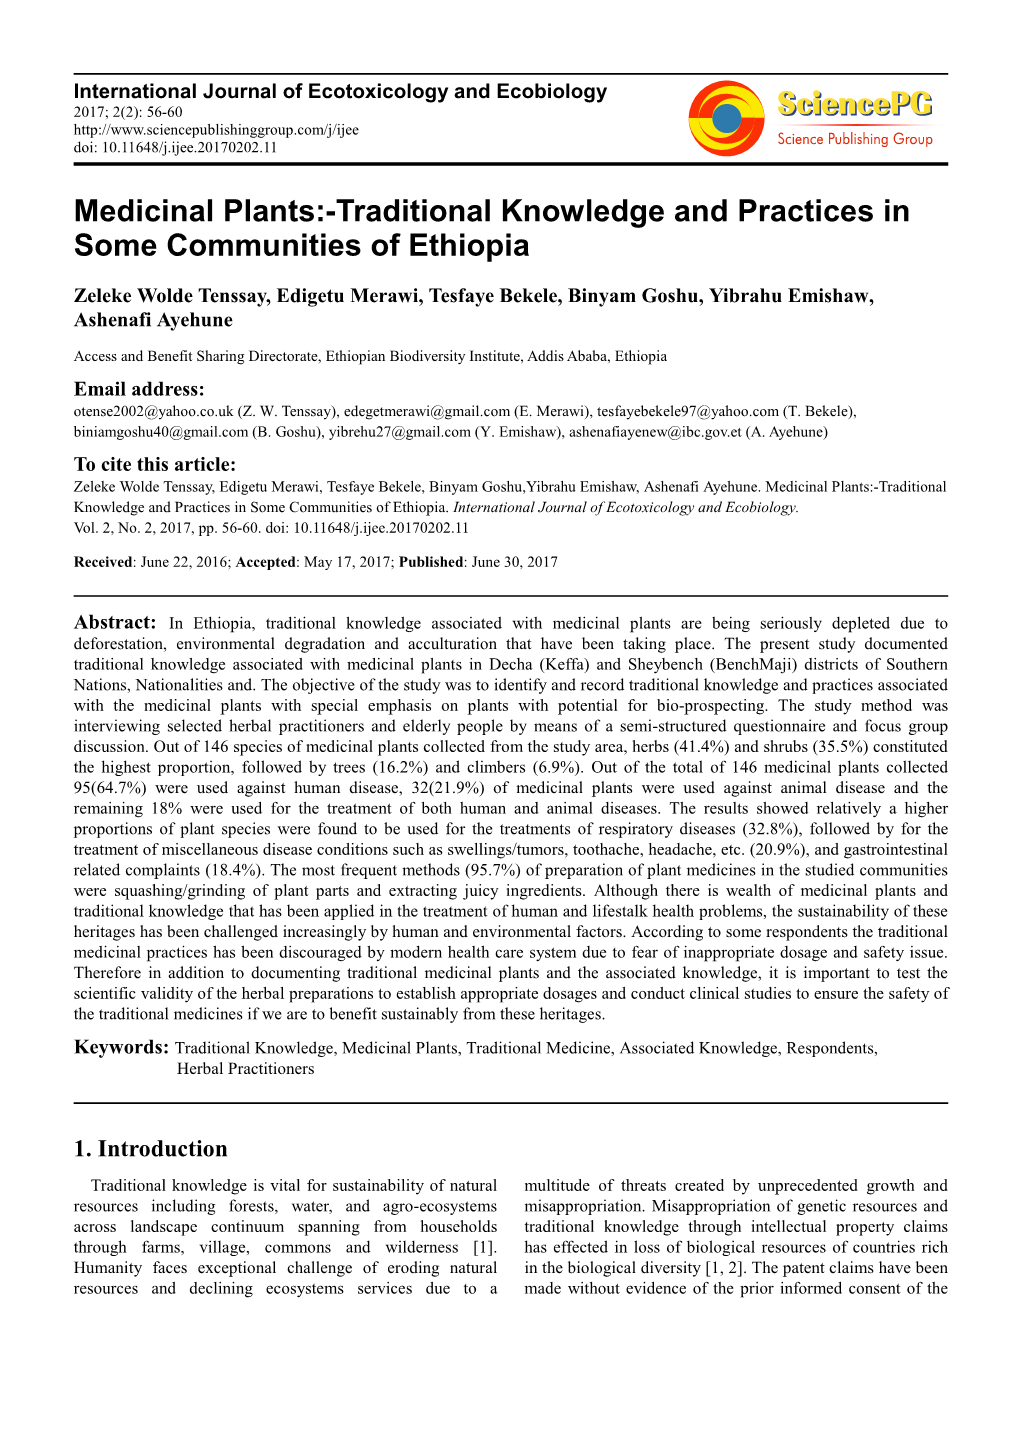 Traditional Knowledge and Practices in Some Communities of Ethiopia